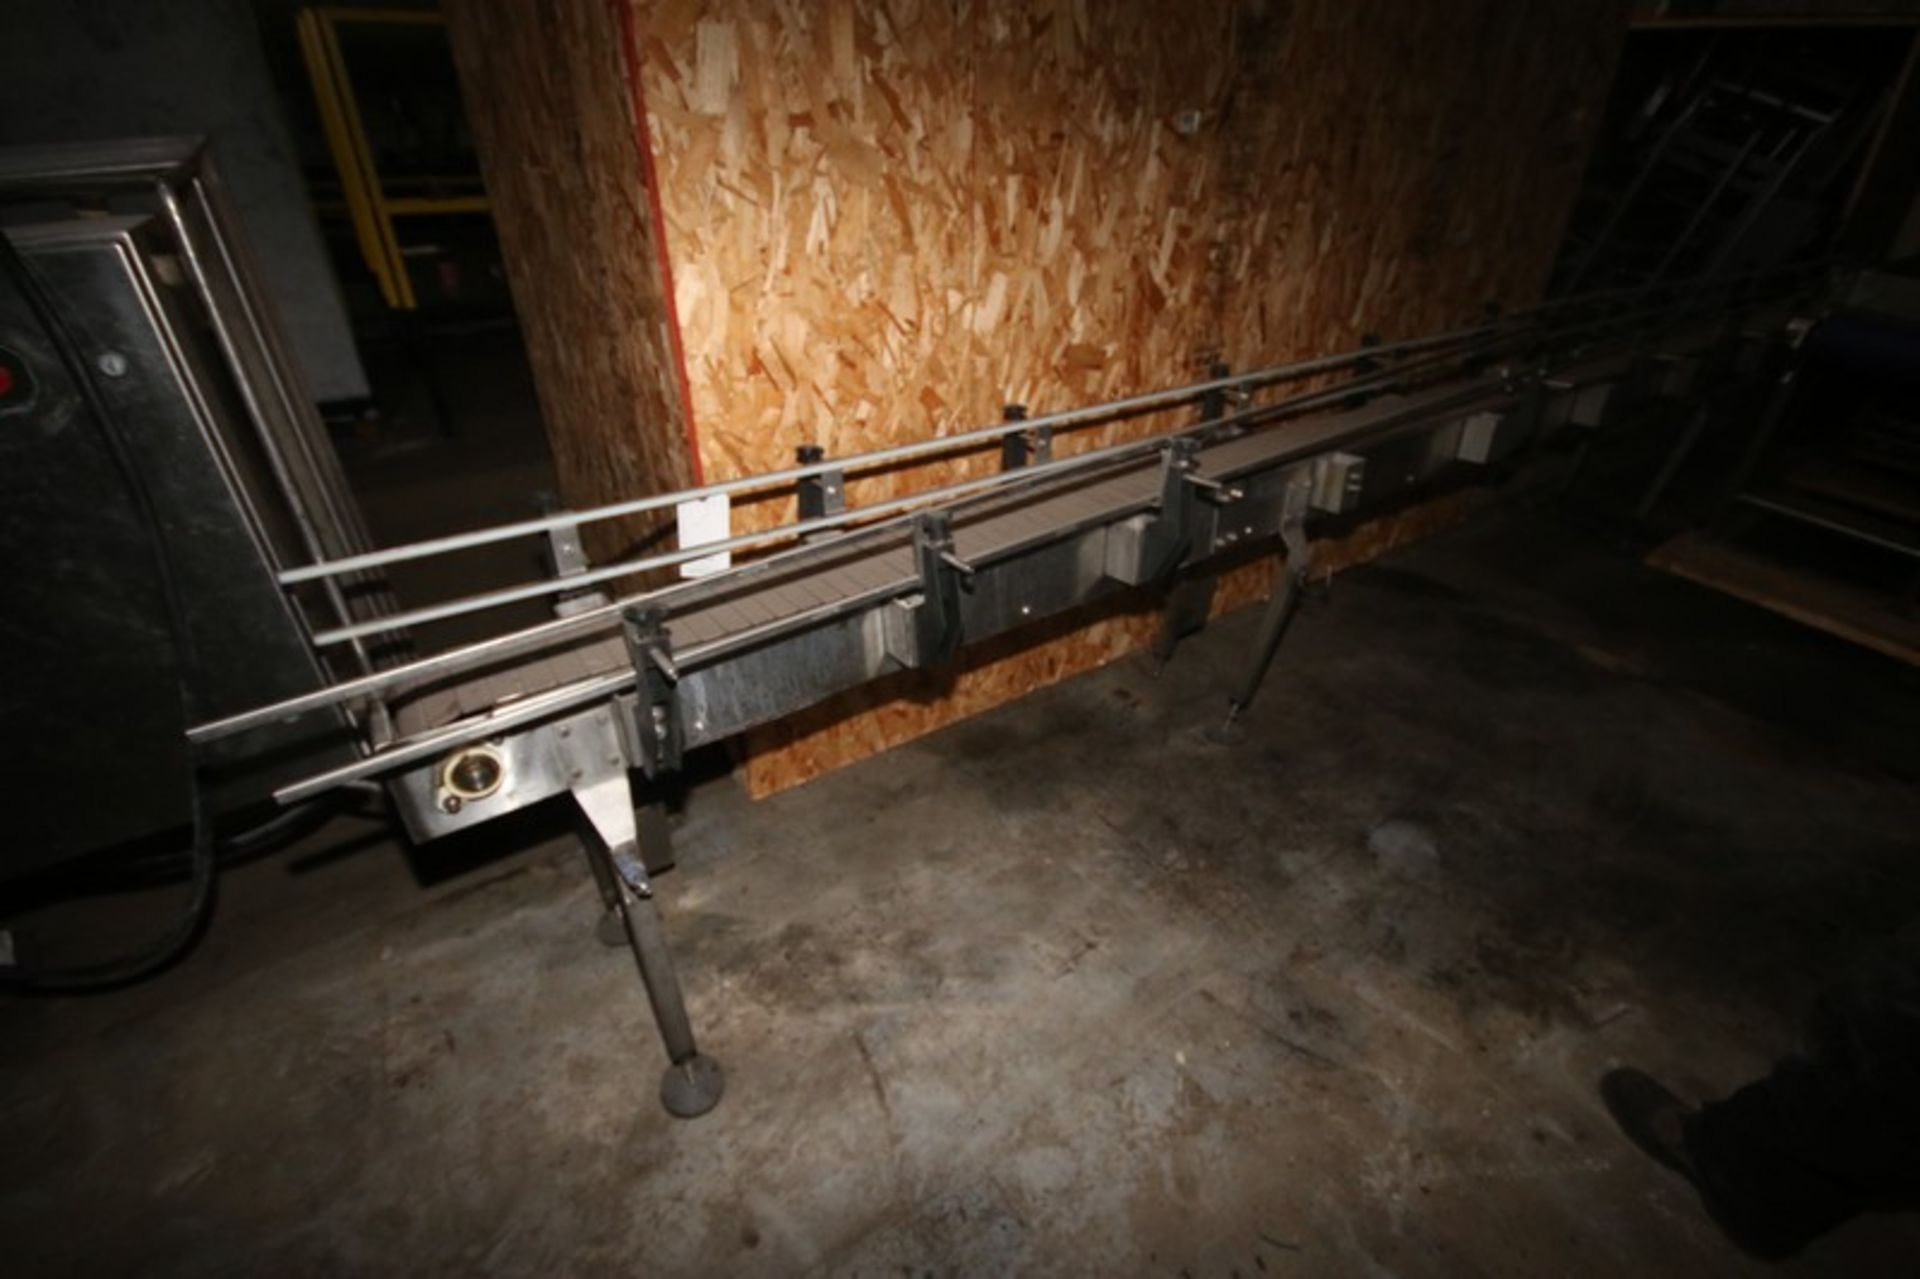 Straight Section of Conveyor, Overall Dims.: Aprox. 22' L x 7.5" W Conveyor Chain - Image 2 of 4